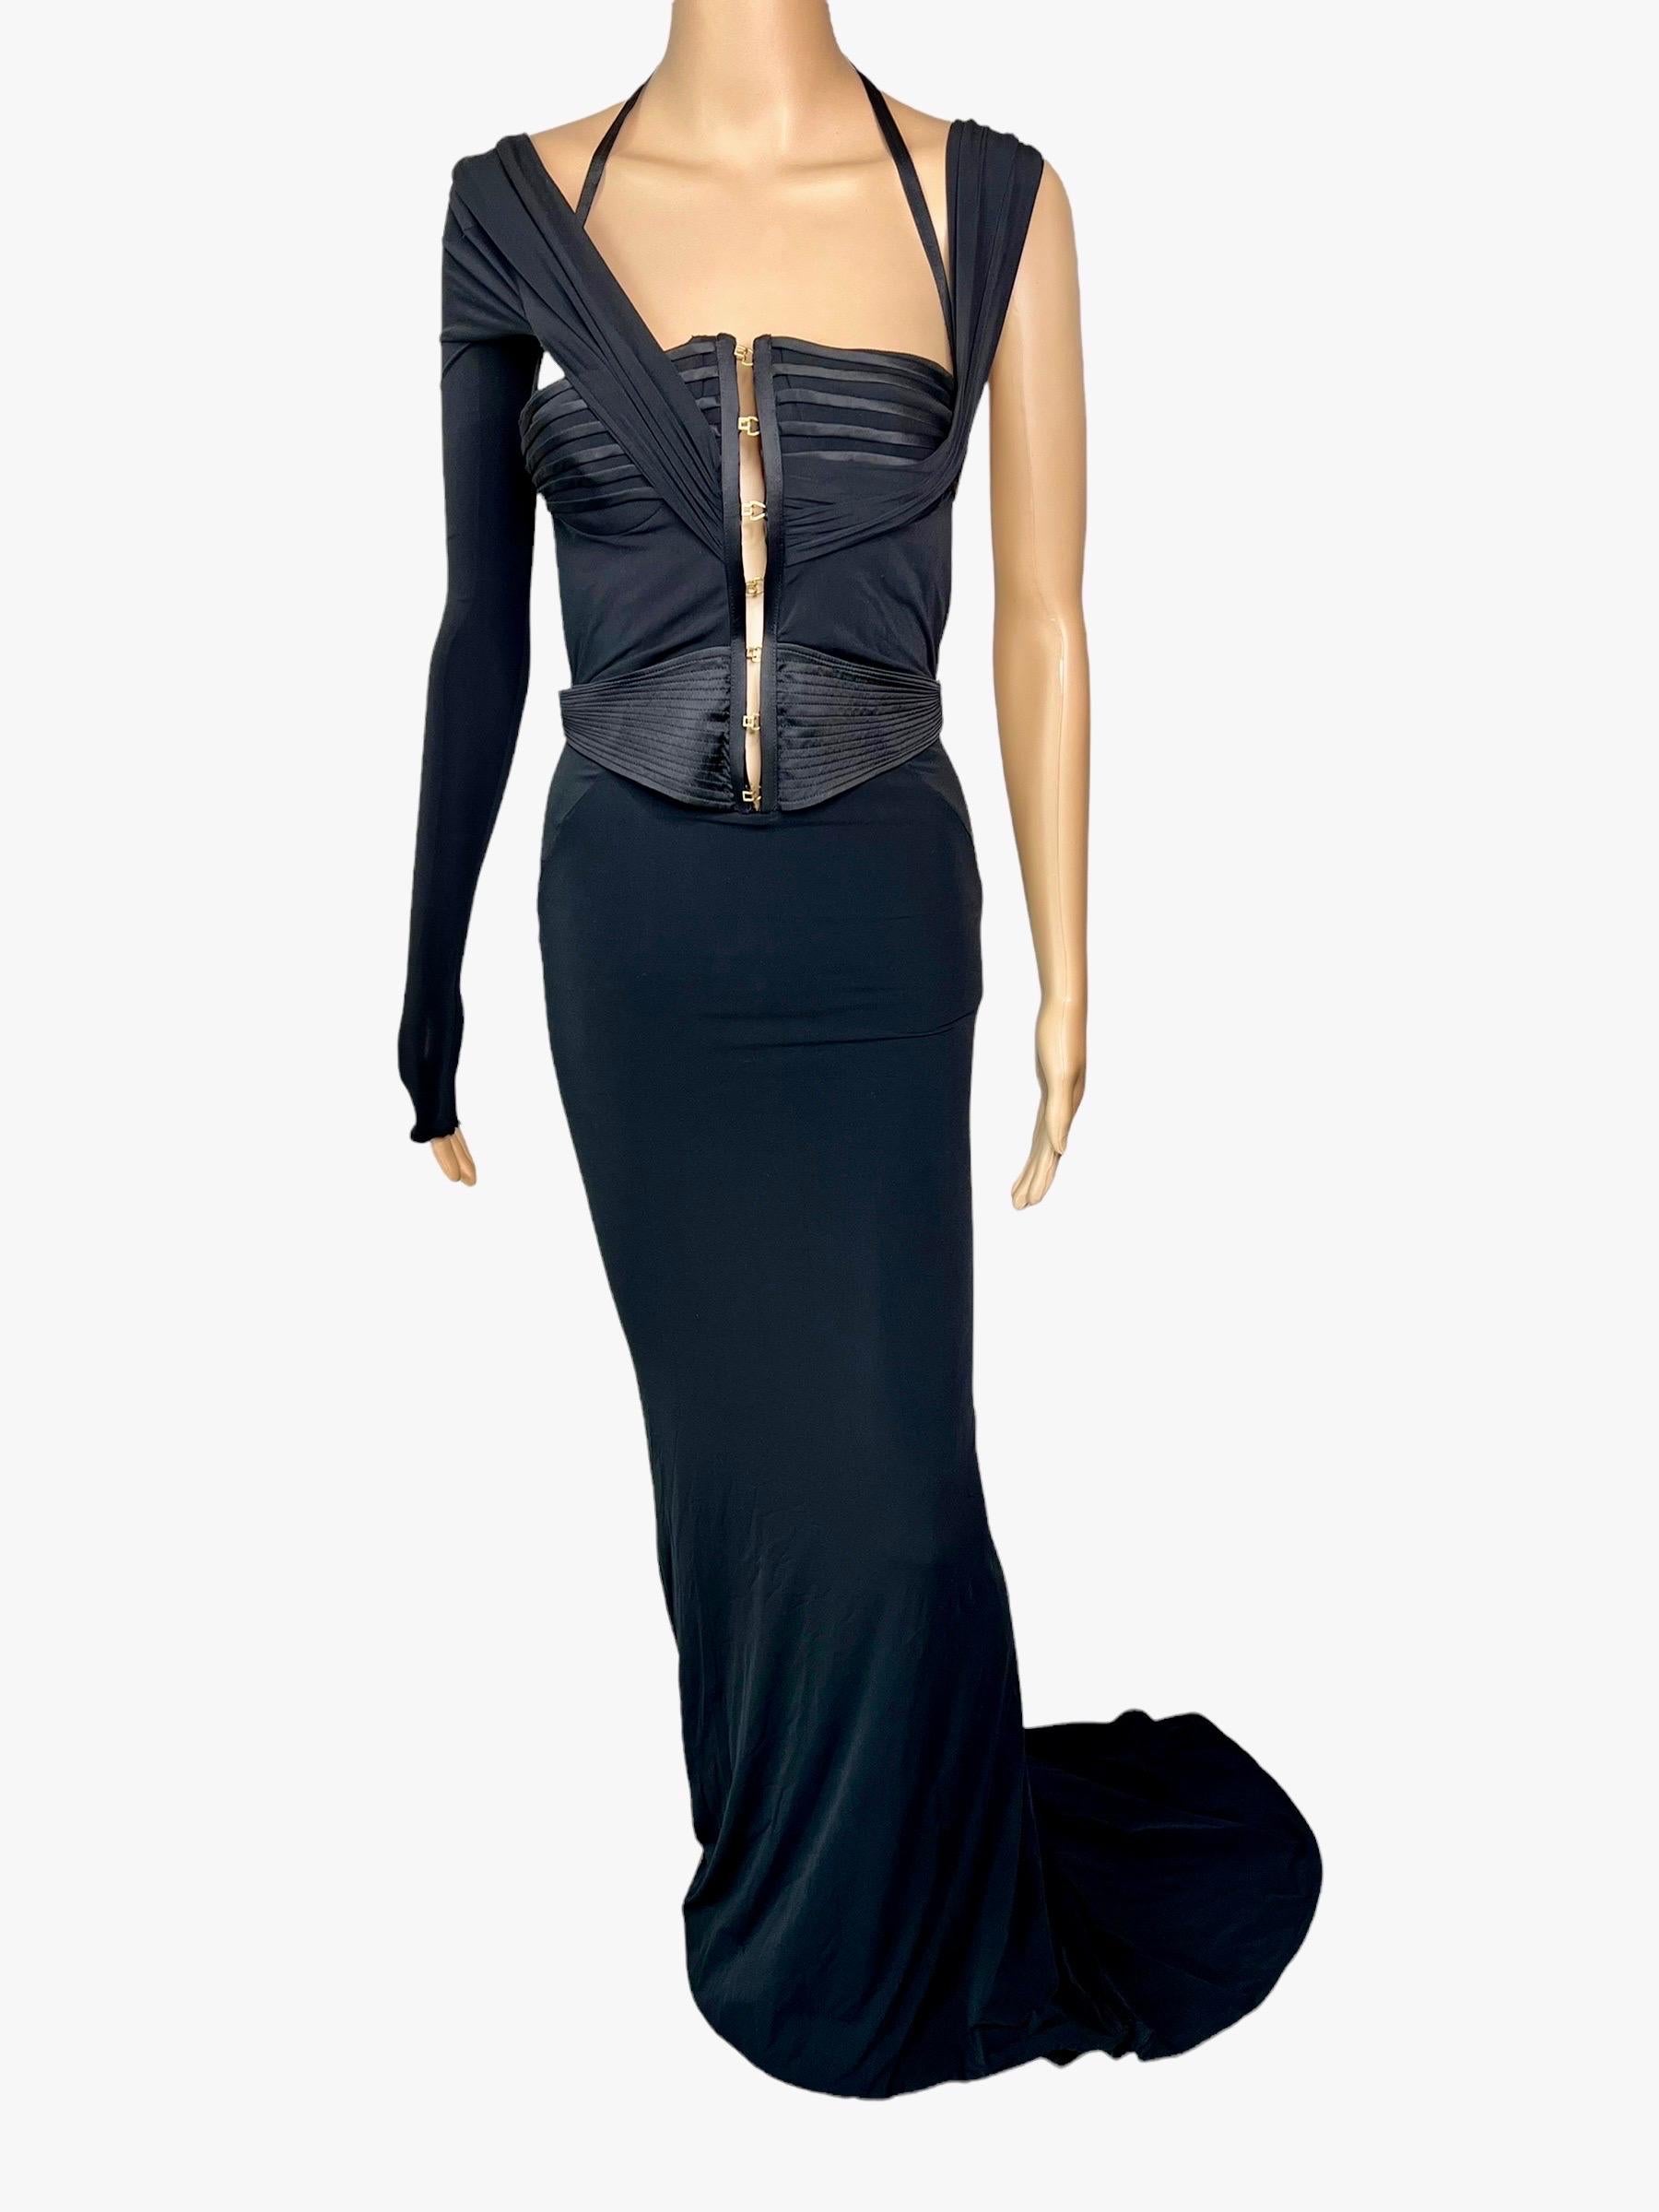 Tom Ford for Gucci F/W 2003 Bustier Corset Cutout Train Black Evening Dress Gown 3